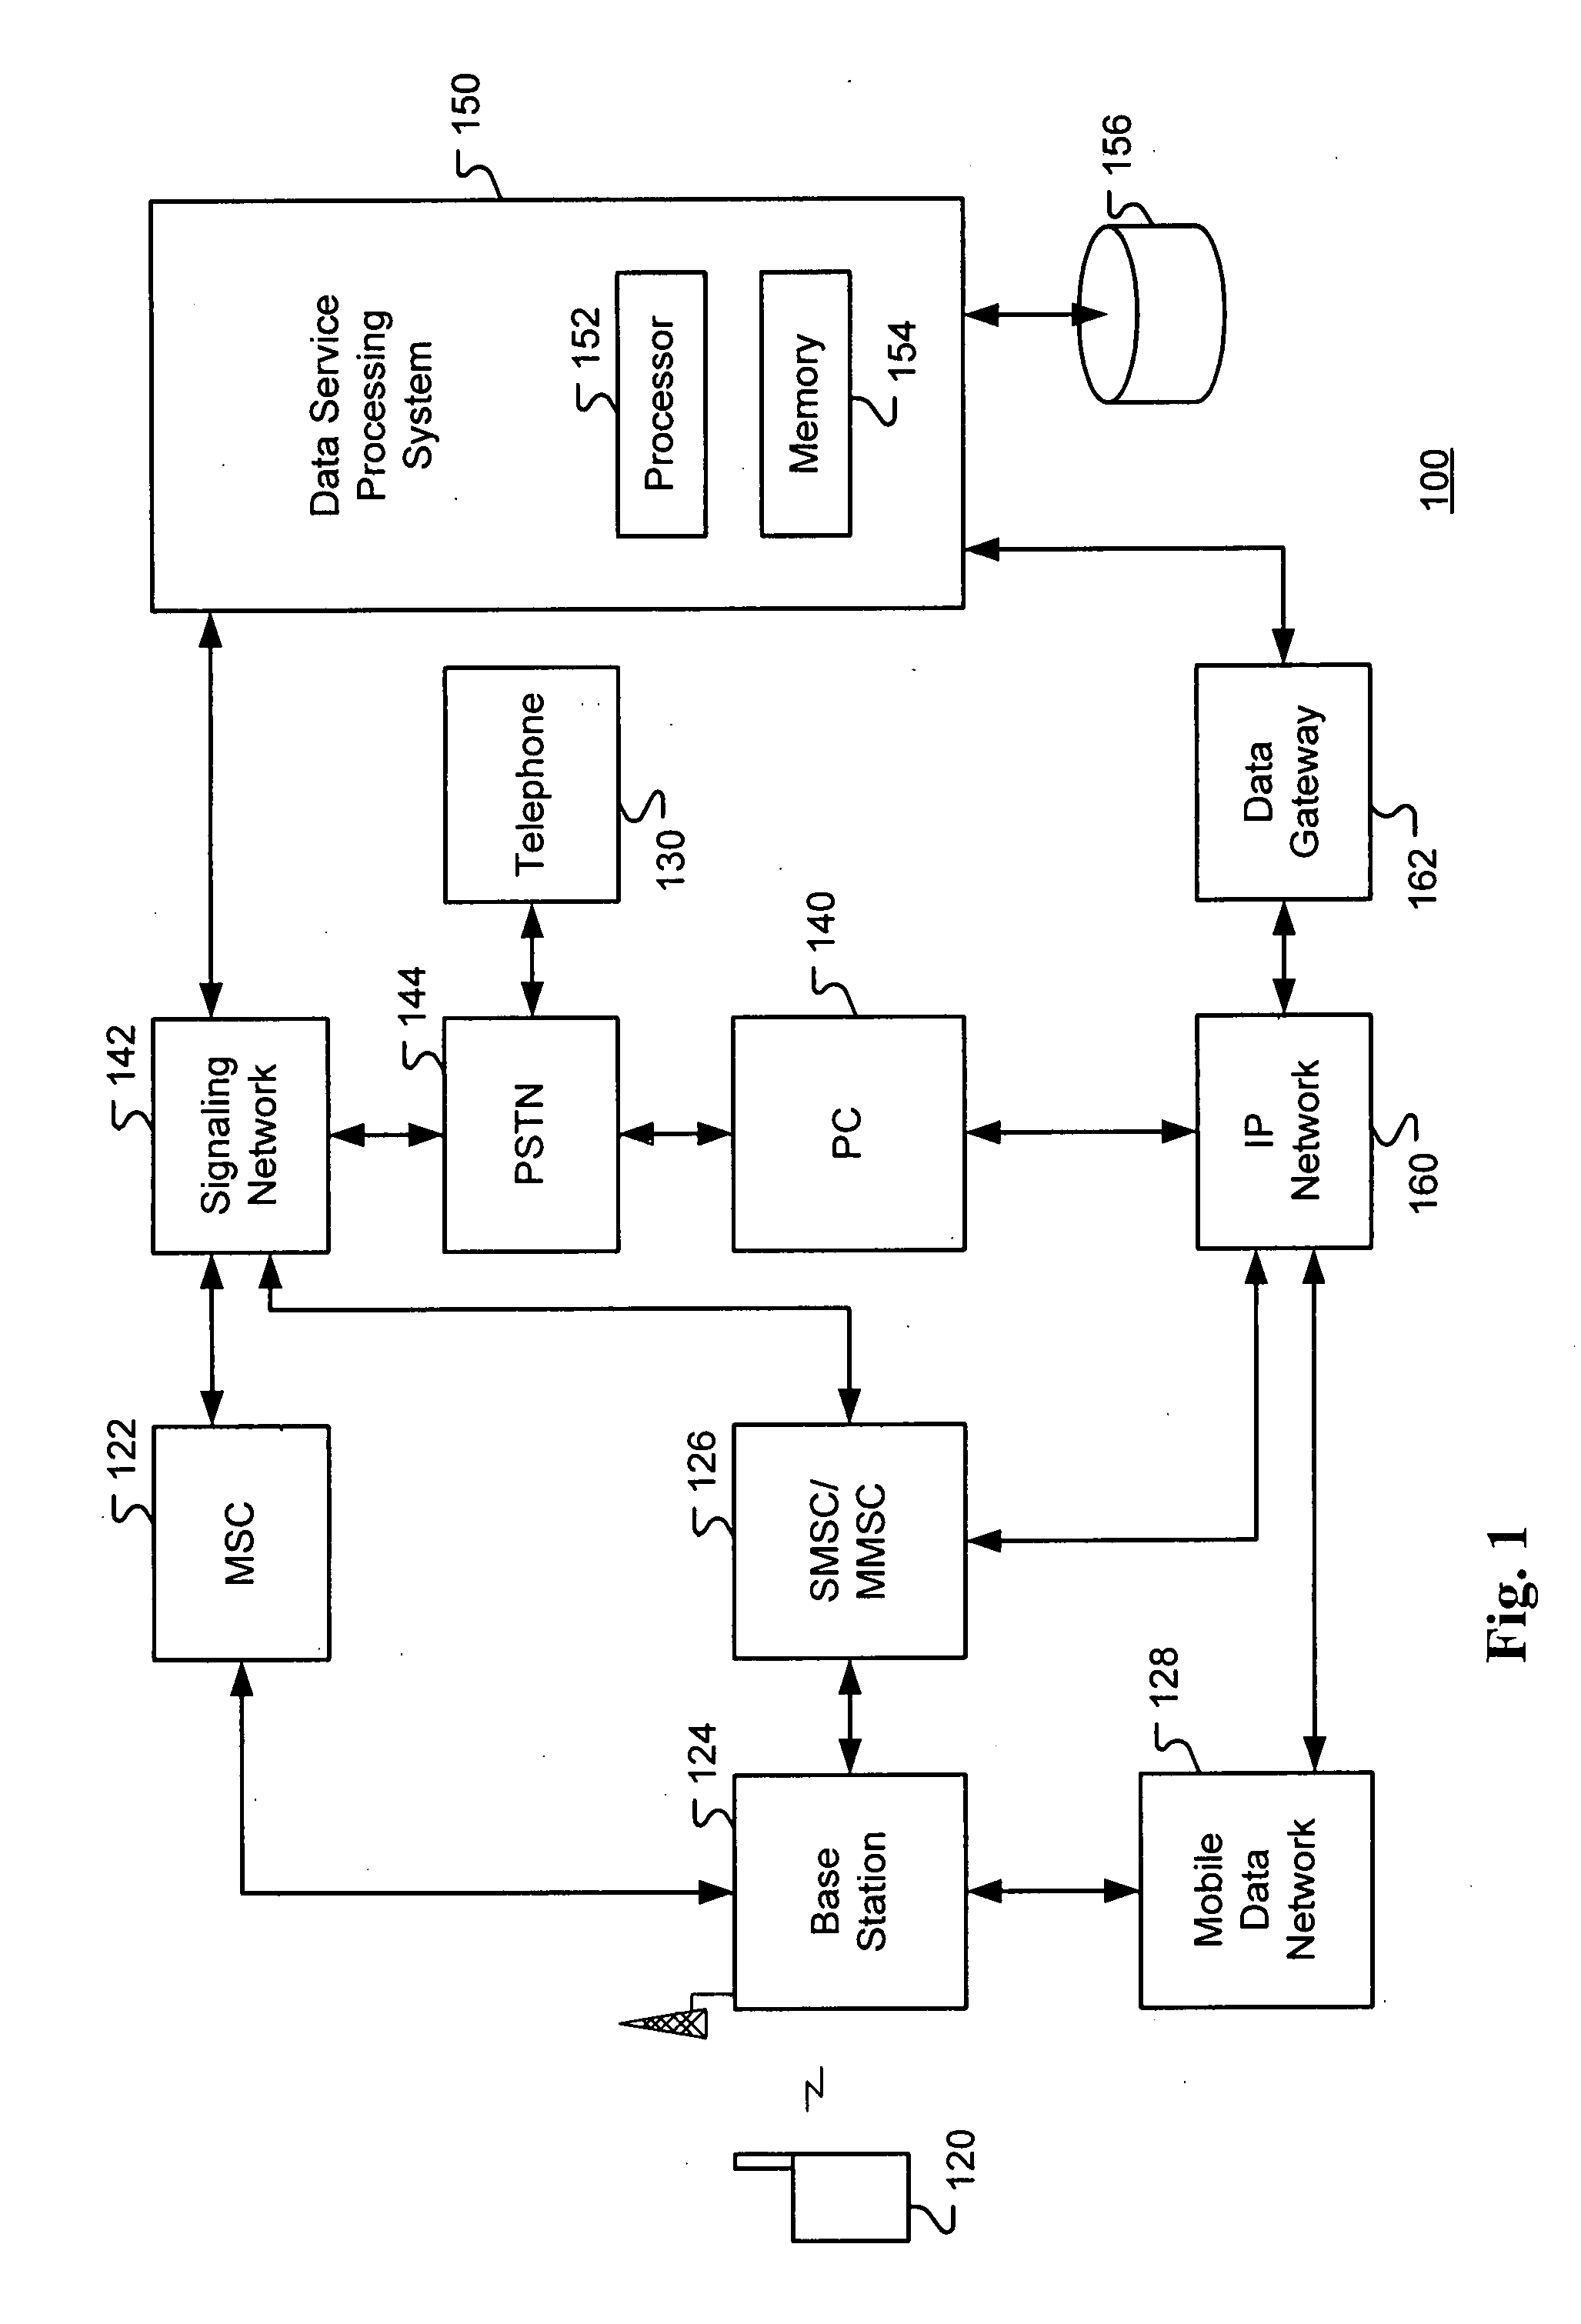 System and method for service invocation and response with a communication device